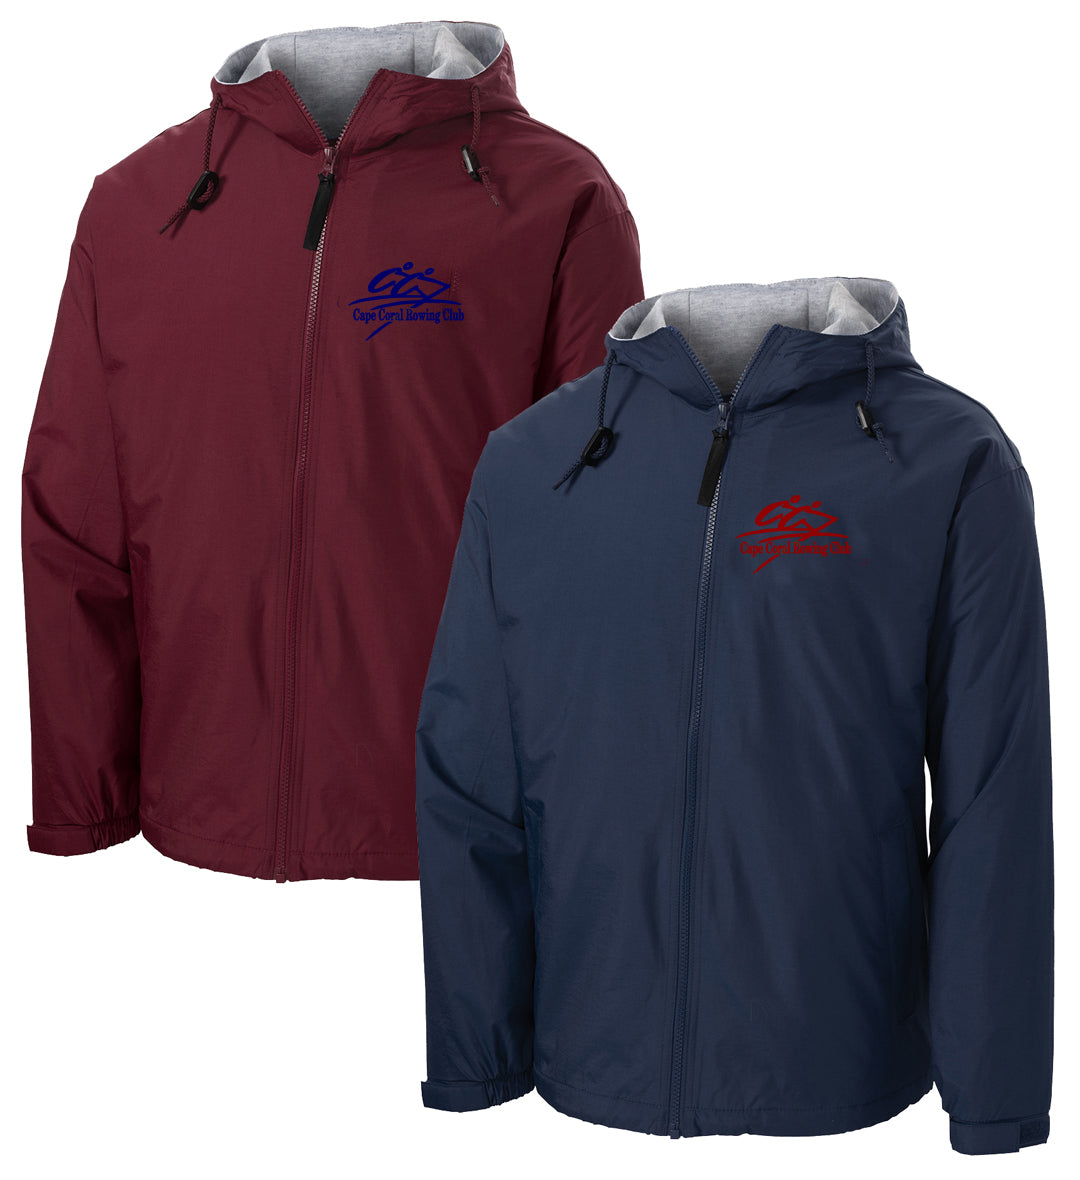 Cape Coral Rowing Club Team Spectator Jacket